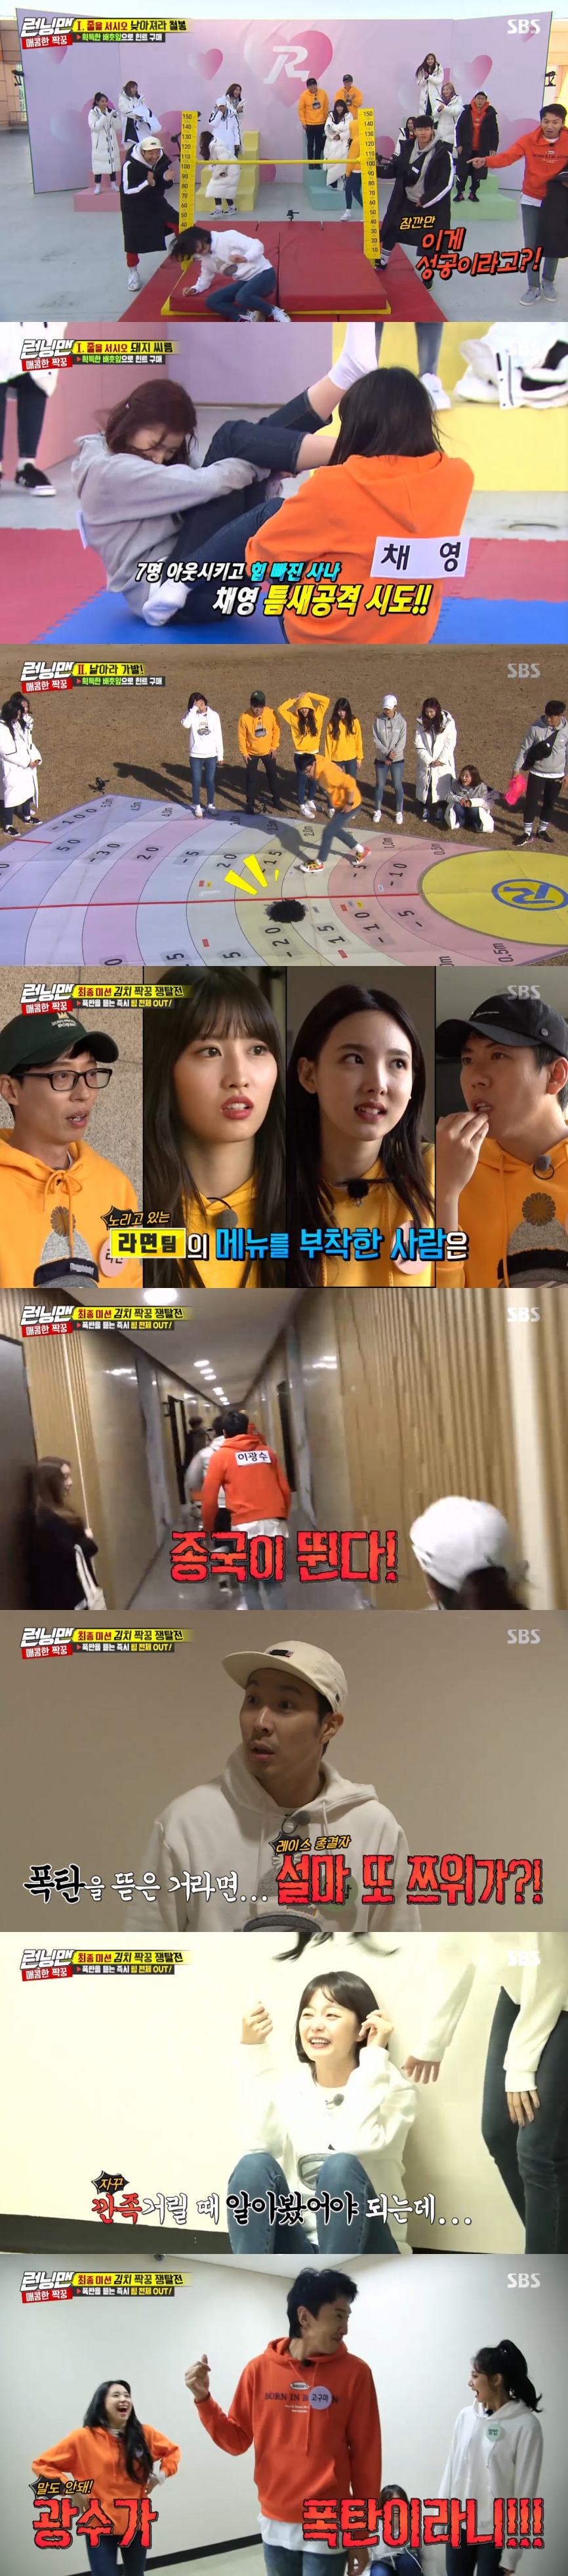 Running Man, who played and played, gave the original fun.On SBS Running Man broadcast on December 2, Kimchis special race was held to find Kimchis real mate.Running Man sister group, TWICE complete body was together.As a result of the fierce team selection game, Jeon So-min Haha Jeongyeon Tsuwi is a rice rice team, Sana Jihyo Song Ji-hyo Kim Jong-kook is a meat team, Yoo Jae-Suk Momo Yang Se-chan Nayeon is a ramen team, Mina Chae Young is a Dahyun Lee Kwang-soo is a Sweet potato team Okay.The full-scale game began, and the losing team had to carry out a penalty of 100 Kim Jang. The first time, the Stand in line game was held, and the members challenged Be low.The hints were available with the acquired cabbage leaves; Kim Jong-kooks performance led the team to acquire 15 additional cabbage leaves first.The next game was King Rassam, and Sweet potato team won the second round with Lee Kwang-soo.The third game was a pig wrestling, and the meat team won the final.The final mission was a contest for Kimchis mates, and most people thought that Sweet potato, beef, rice, or ramen were Kimchis mates.If you open the name tag with the menu, you can exchange the menu. If you open the name tag with the bomb, all the team will be in-N-Out Burger, as well as the menu to the opponent team.The member with nothing was only the torn member In-N-Out Burger.So you and I both pretended to be bombs, and most of the Sweet potato was determined not to be the number one, and refused to say that ramen would be the number one.Among them, Jeon So-min boldly ripped off the name tag of Lee Kwang-soo, but the Sweet potato team bomb was Lee Kwang-soo.As a result, the rice team was moved to the power prison without any hesitation, and the early power In-N-Out Burger was moved.Meanwhile, Sweet potato & Mathematics team targeted ramen teams, especially Dahyun, who predicted Nayeon as a bomb for the ramen team.The Ramen teams infiltrations were carried out, reminiscent of spy movies, and the Ramen teams operations were not known, and the Ramen team was ambushed on the frequent roads.If Kim Jong-kook turned his head and the operations could fail, the team managed to sneak into the headquarters box, avoiding the surveillance.Now, if you just go on the podium and shout the right answer, if ramen is the number one, then the ramen team will win, and if not the ramen, the whole In-N-Out Burger will be.The win was just around the corner, and suddenly Sweet potato & hand-held team appeared.While the ramen team hitchhiked, the Sweet potato & handy team, which found a hint of headquarters in the building, decided to raid after lurking while waiting for the ramen team to come.Sweet potato & fish team, convinced that the ramen team Yang Se-chan was a menu, did not hesitate to open the name tag of Yang Se-chan.The bomb was Yang Se-chan, Nayeon was a menu. Sweet potato & meat ripped off the bomb without knowing it.The results were as expected: the Ramen team won the final with operations reminiscent of intelligence operations.As a result, the meat team, the rice rice team, and the Sweet potato team were in the ear to perform the final 100 penalty for Kim Jang 100.As a result, the rice team was punished for giving up 100 kimchi.